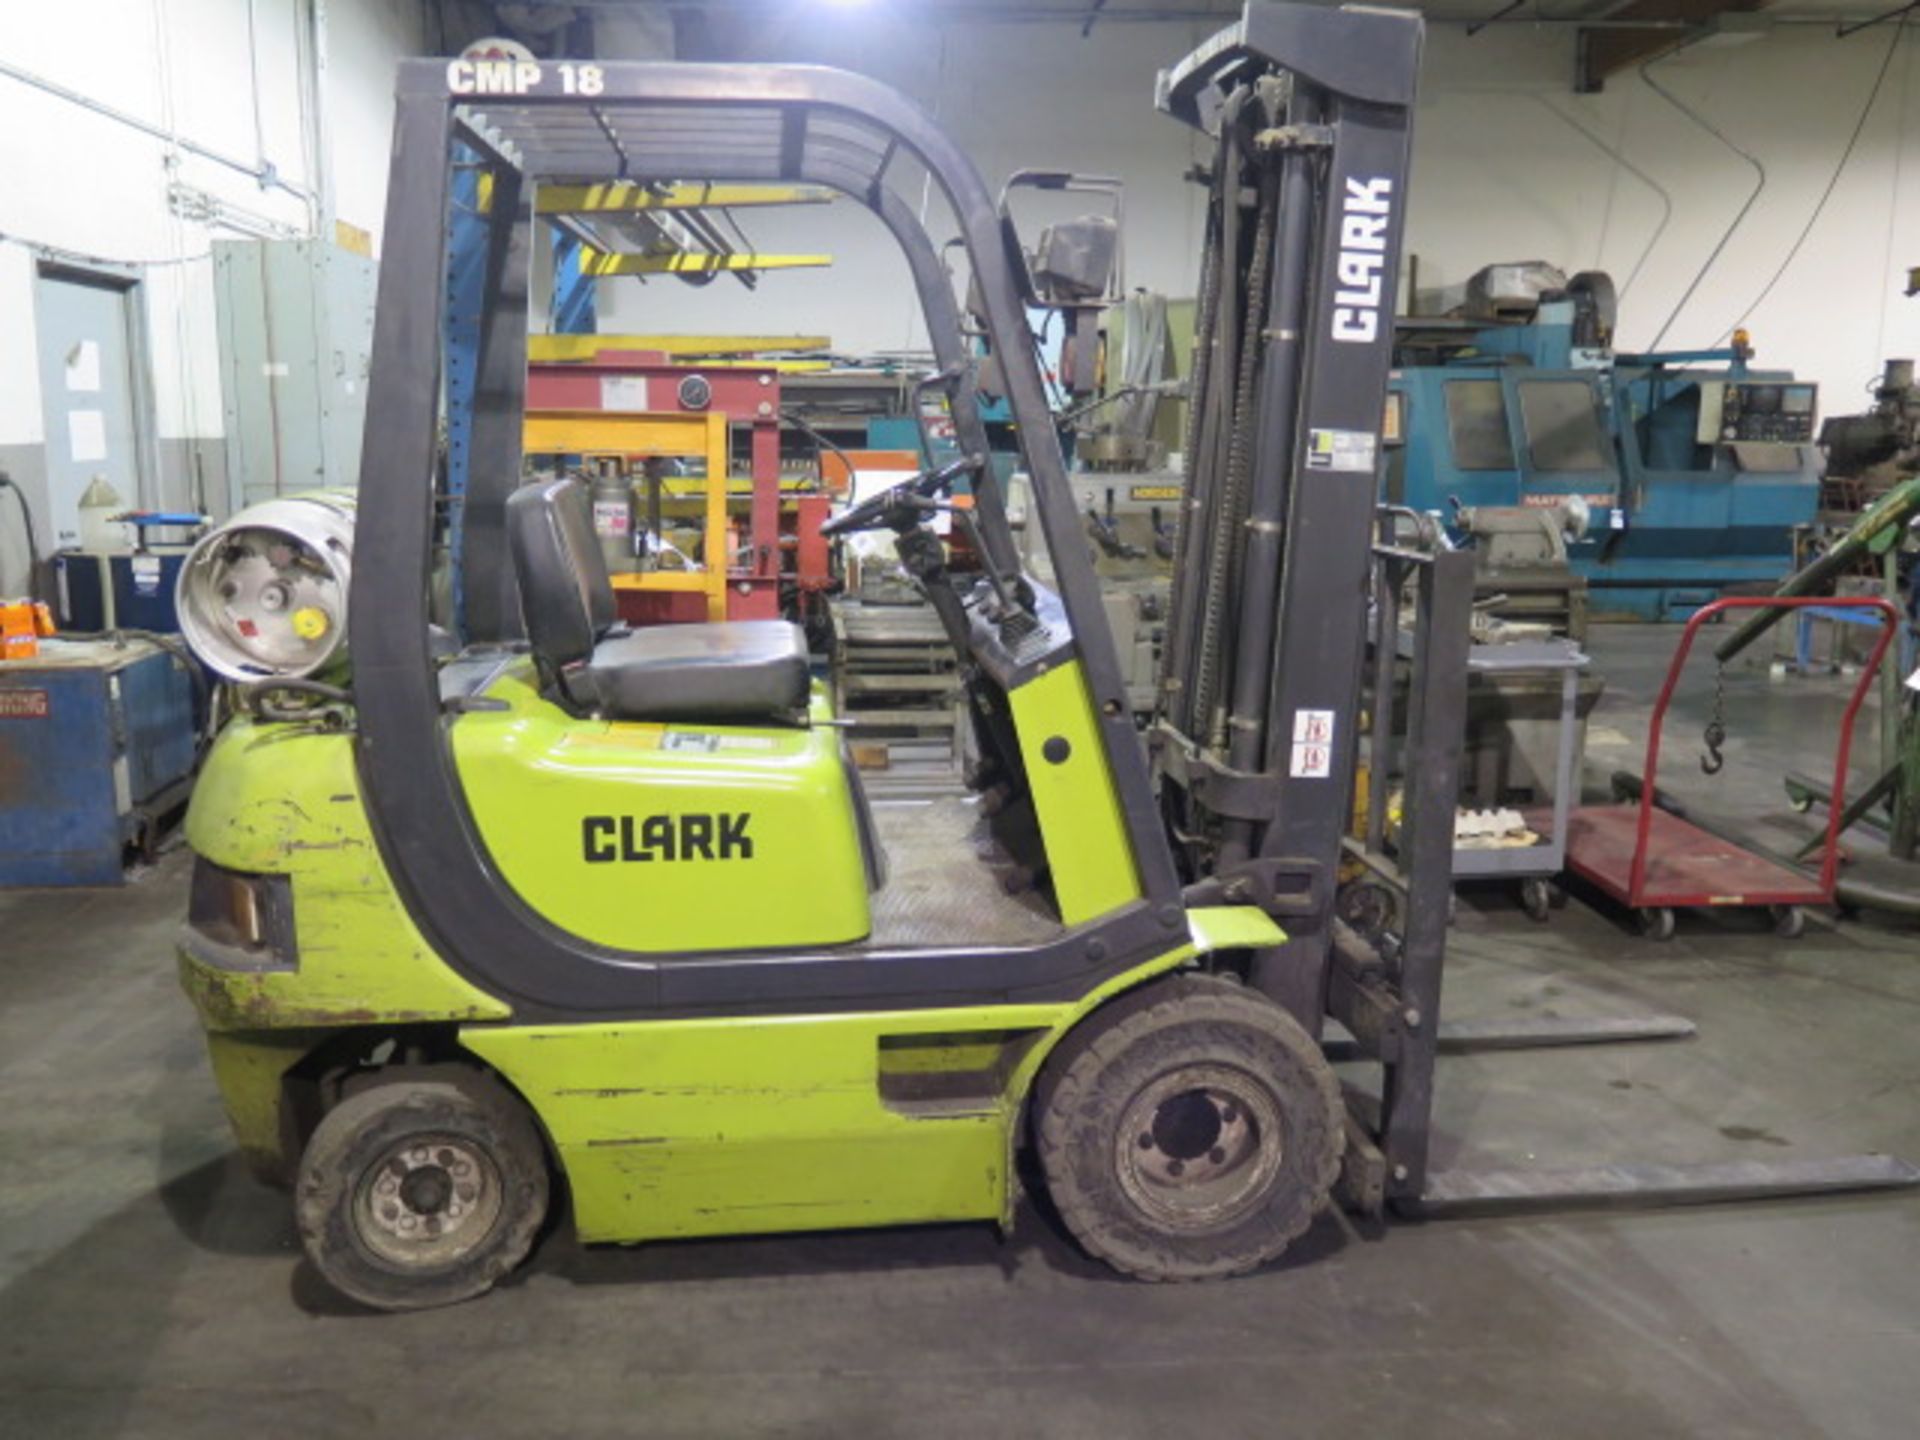 Clark CMP-18 3500 Lb Cap LPG Forklift s/n CMP158L-6851K w/ 3-Stage, 189” Lift Height, SOLD AS IS